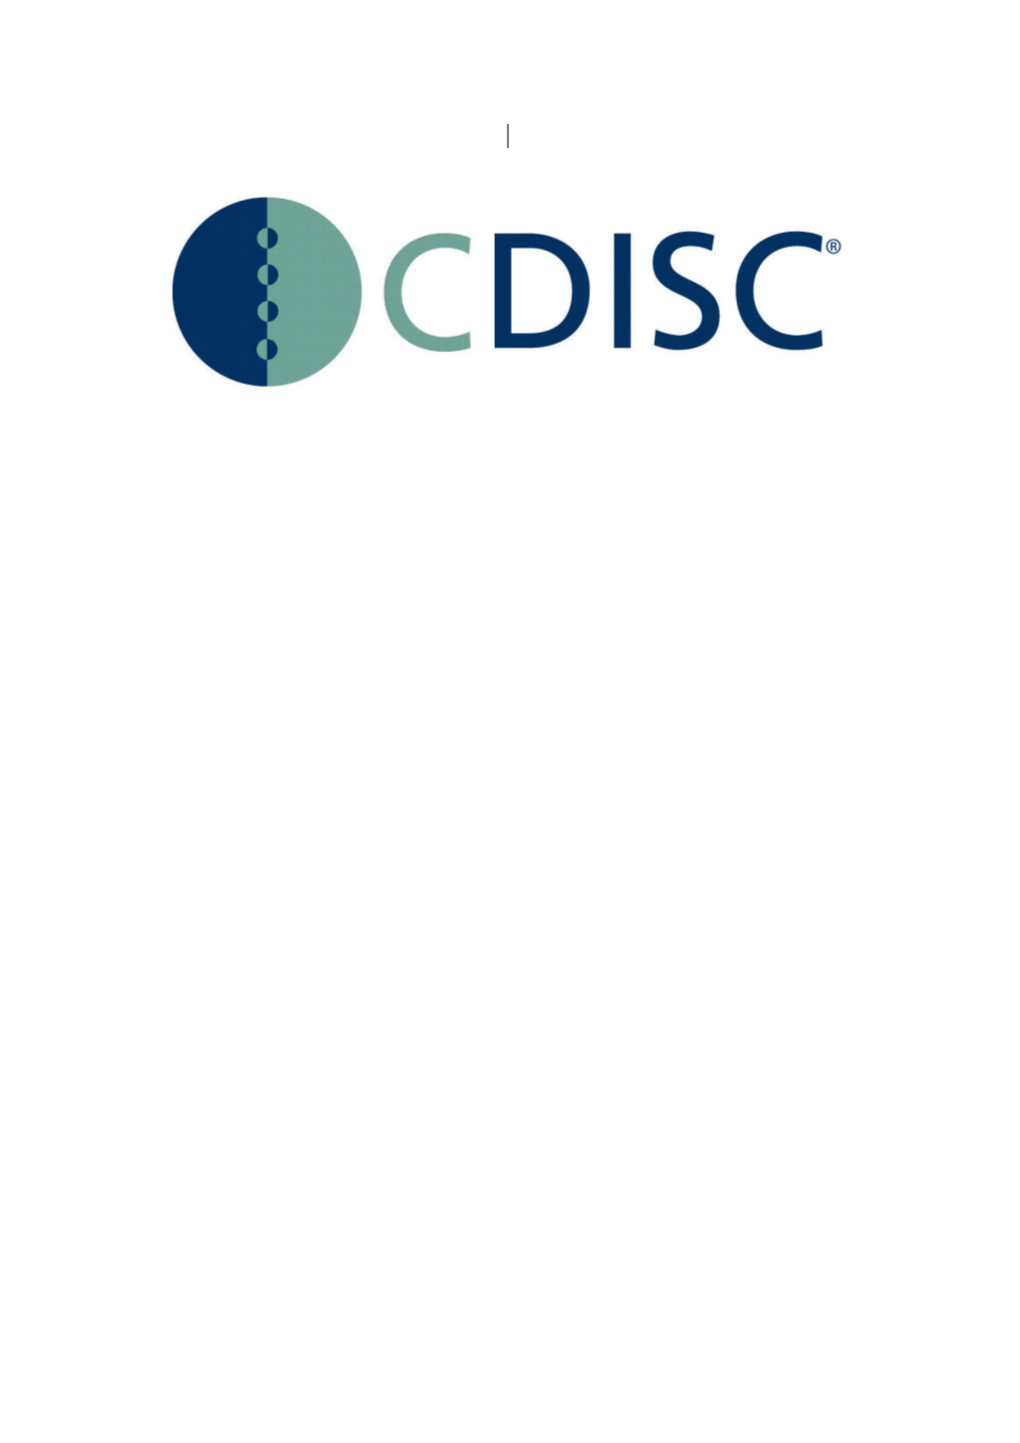 Cdisc South African User Group Charter